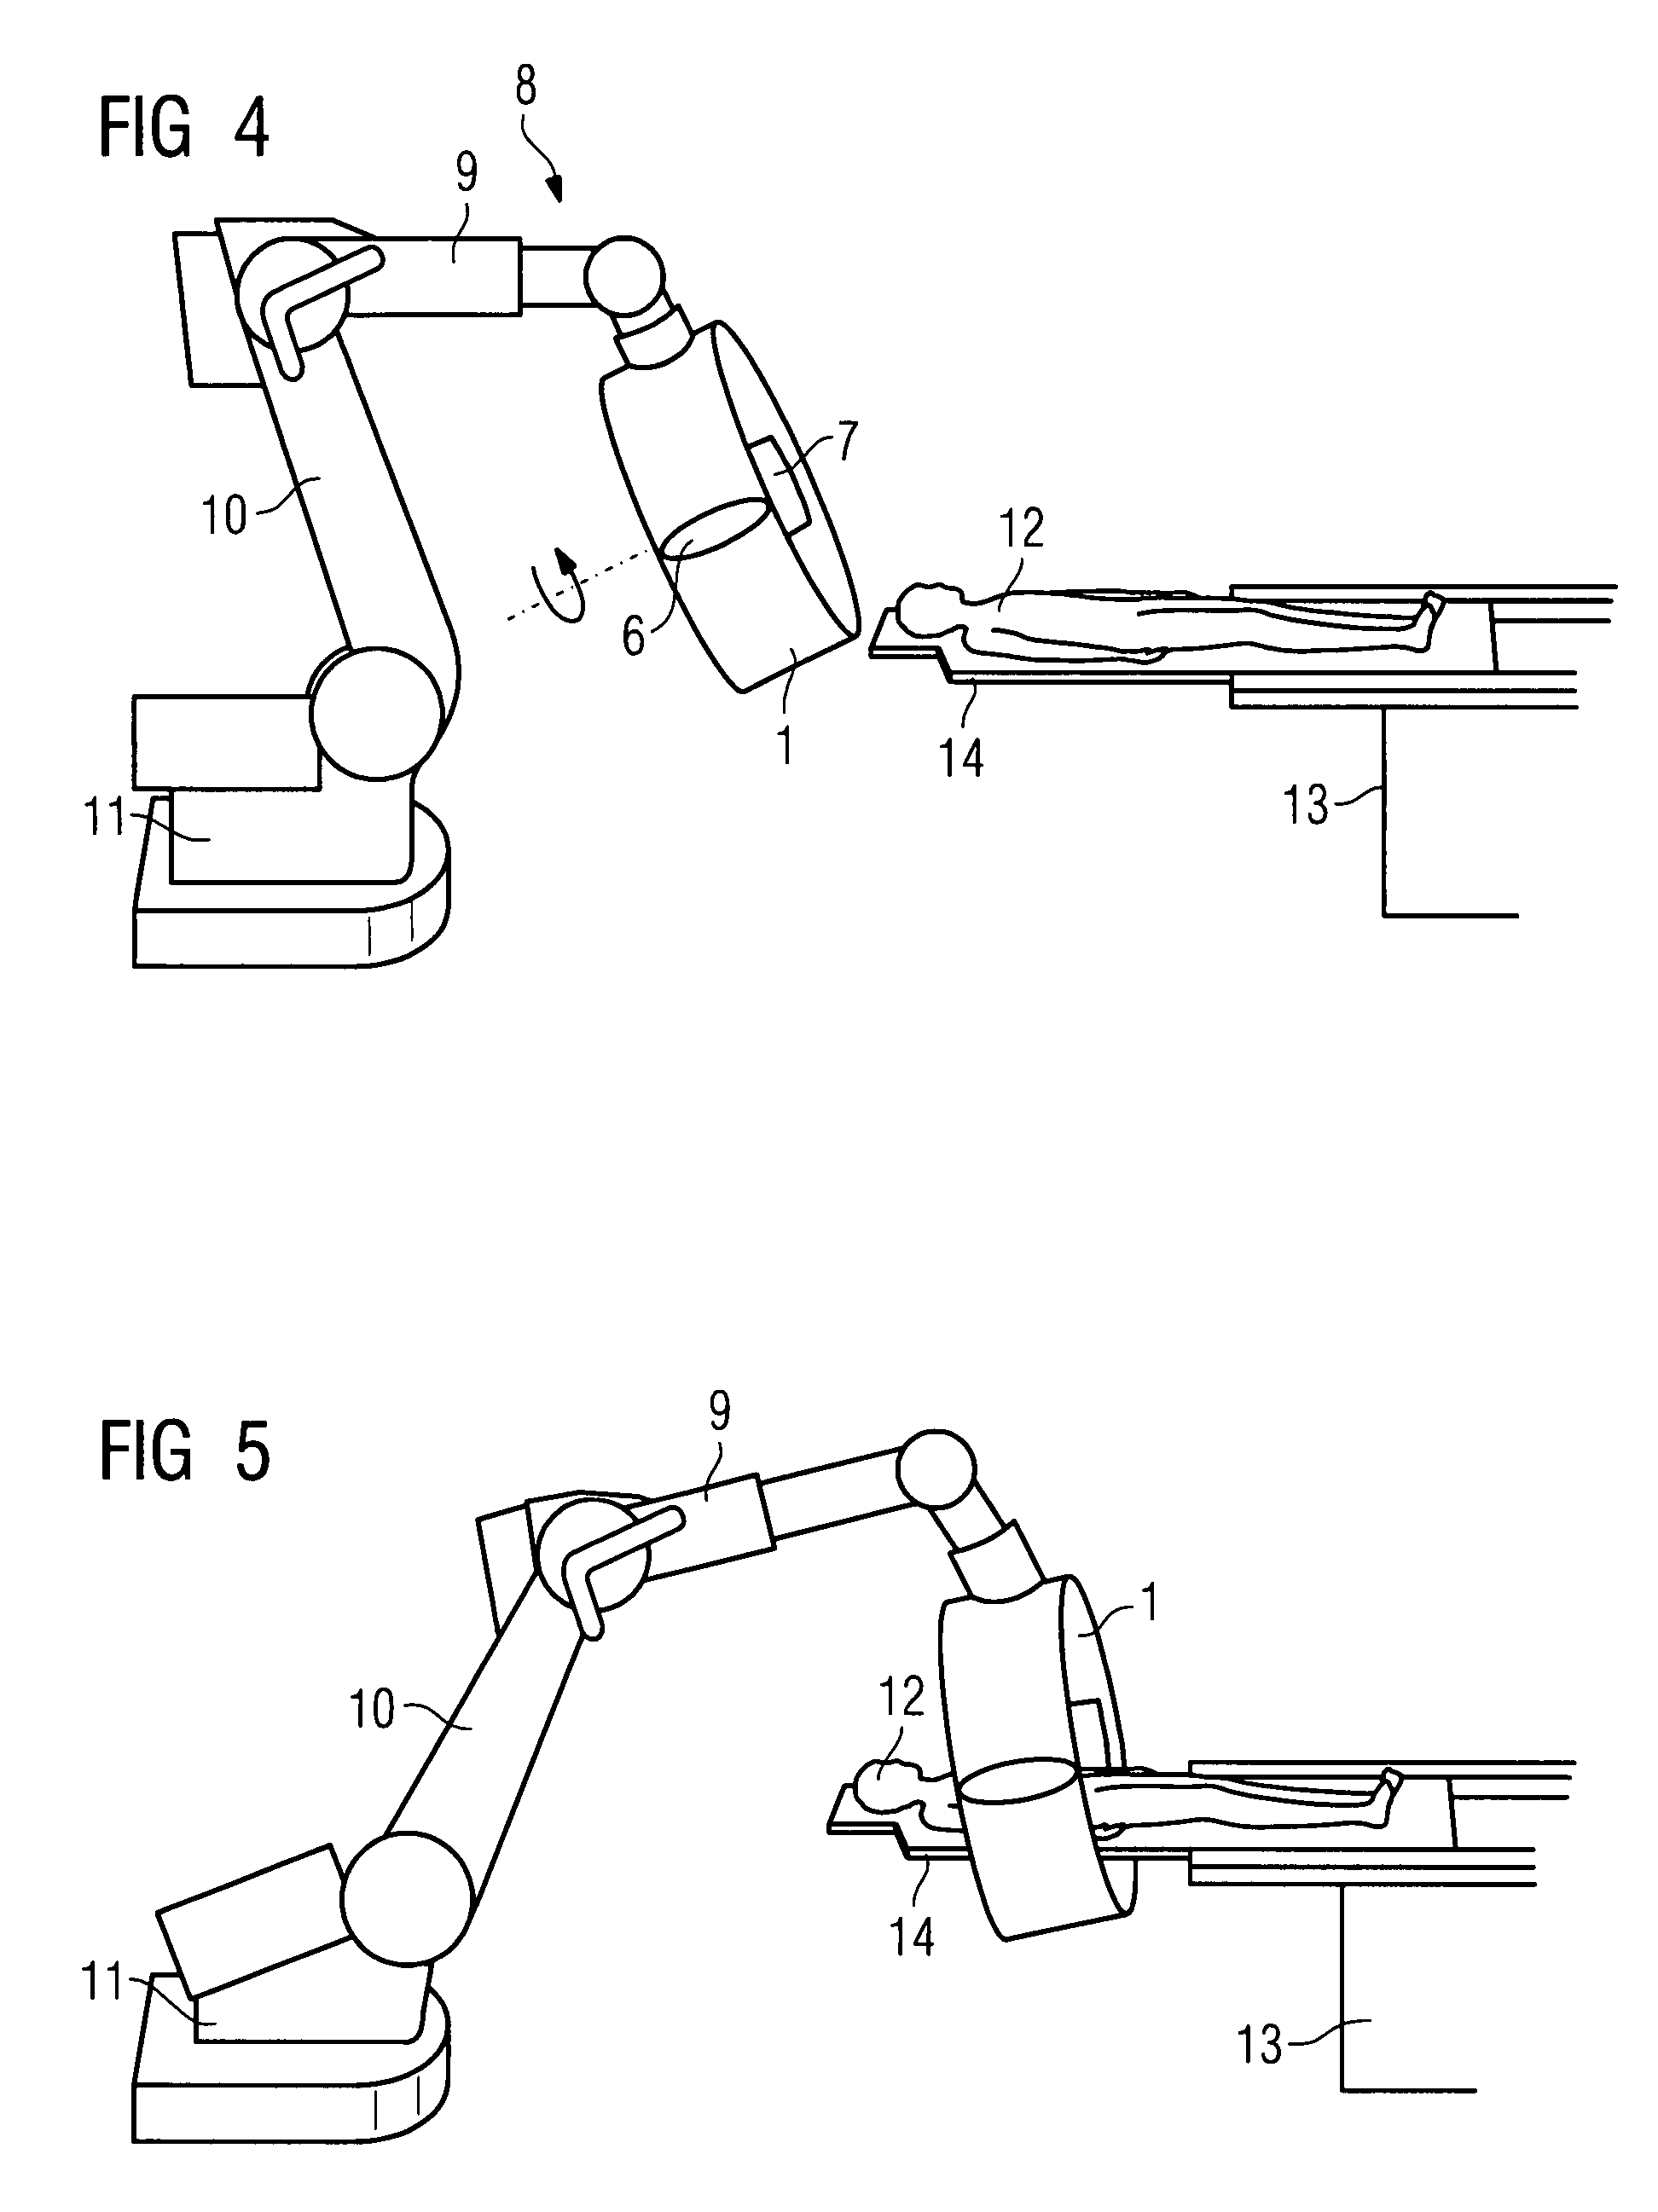 Medical examination and/or treatment apparatus with an electromagnet for navigating a medical instrument and an x-ray device for visual inspection during the navigation